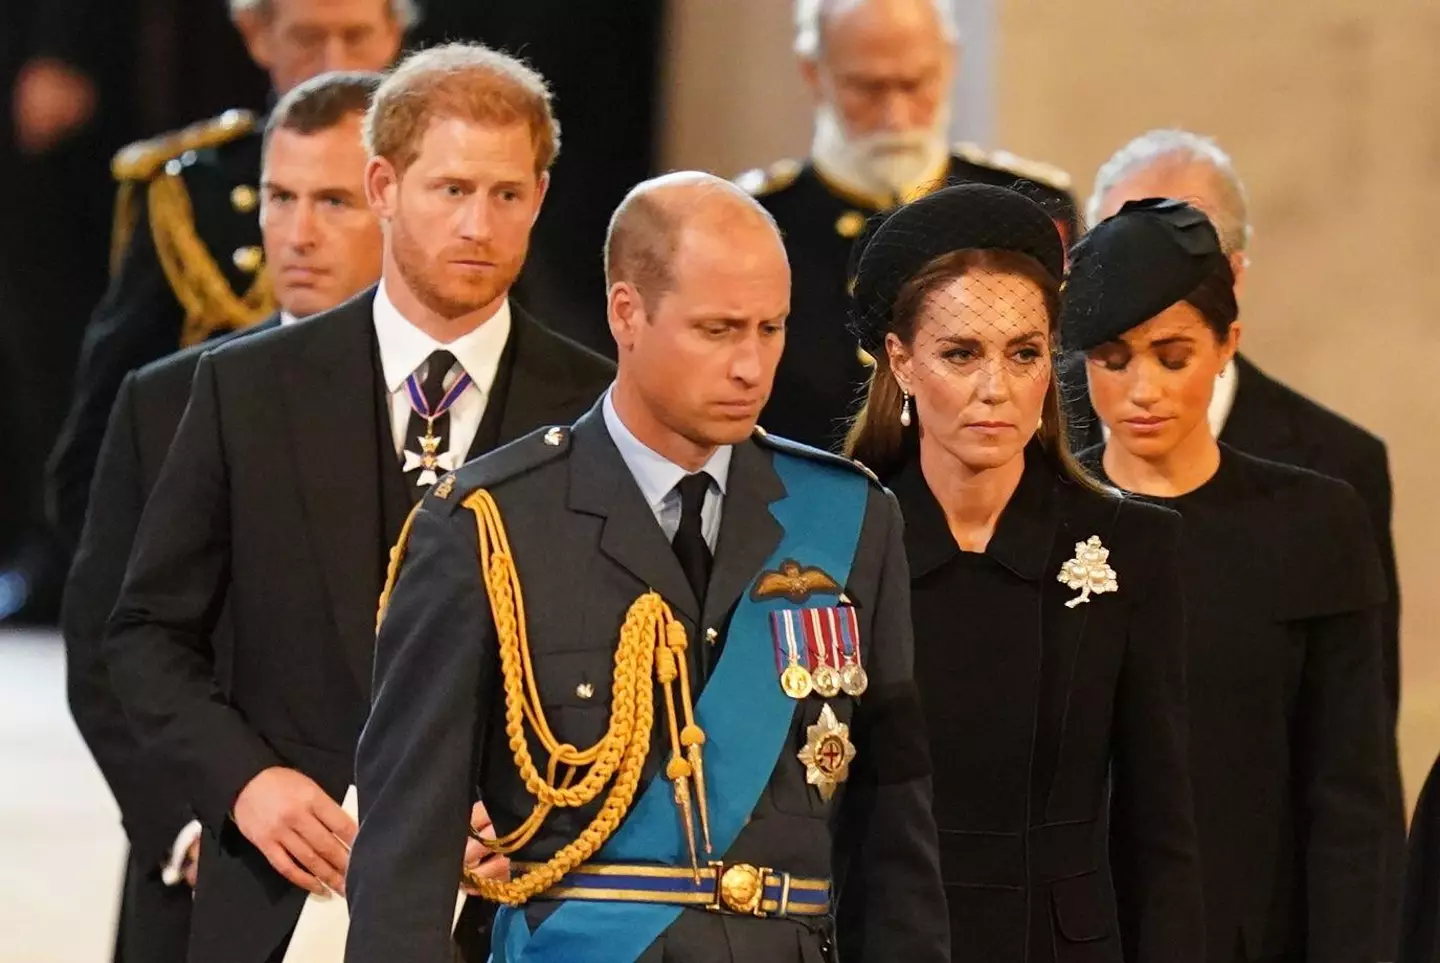 The royal family gathered together for the lying-in-state and the state funeral.